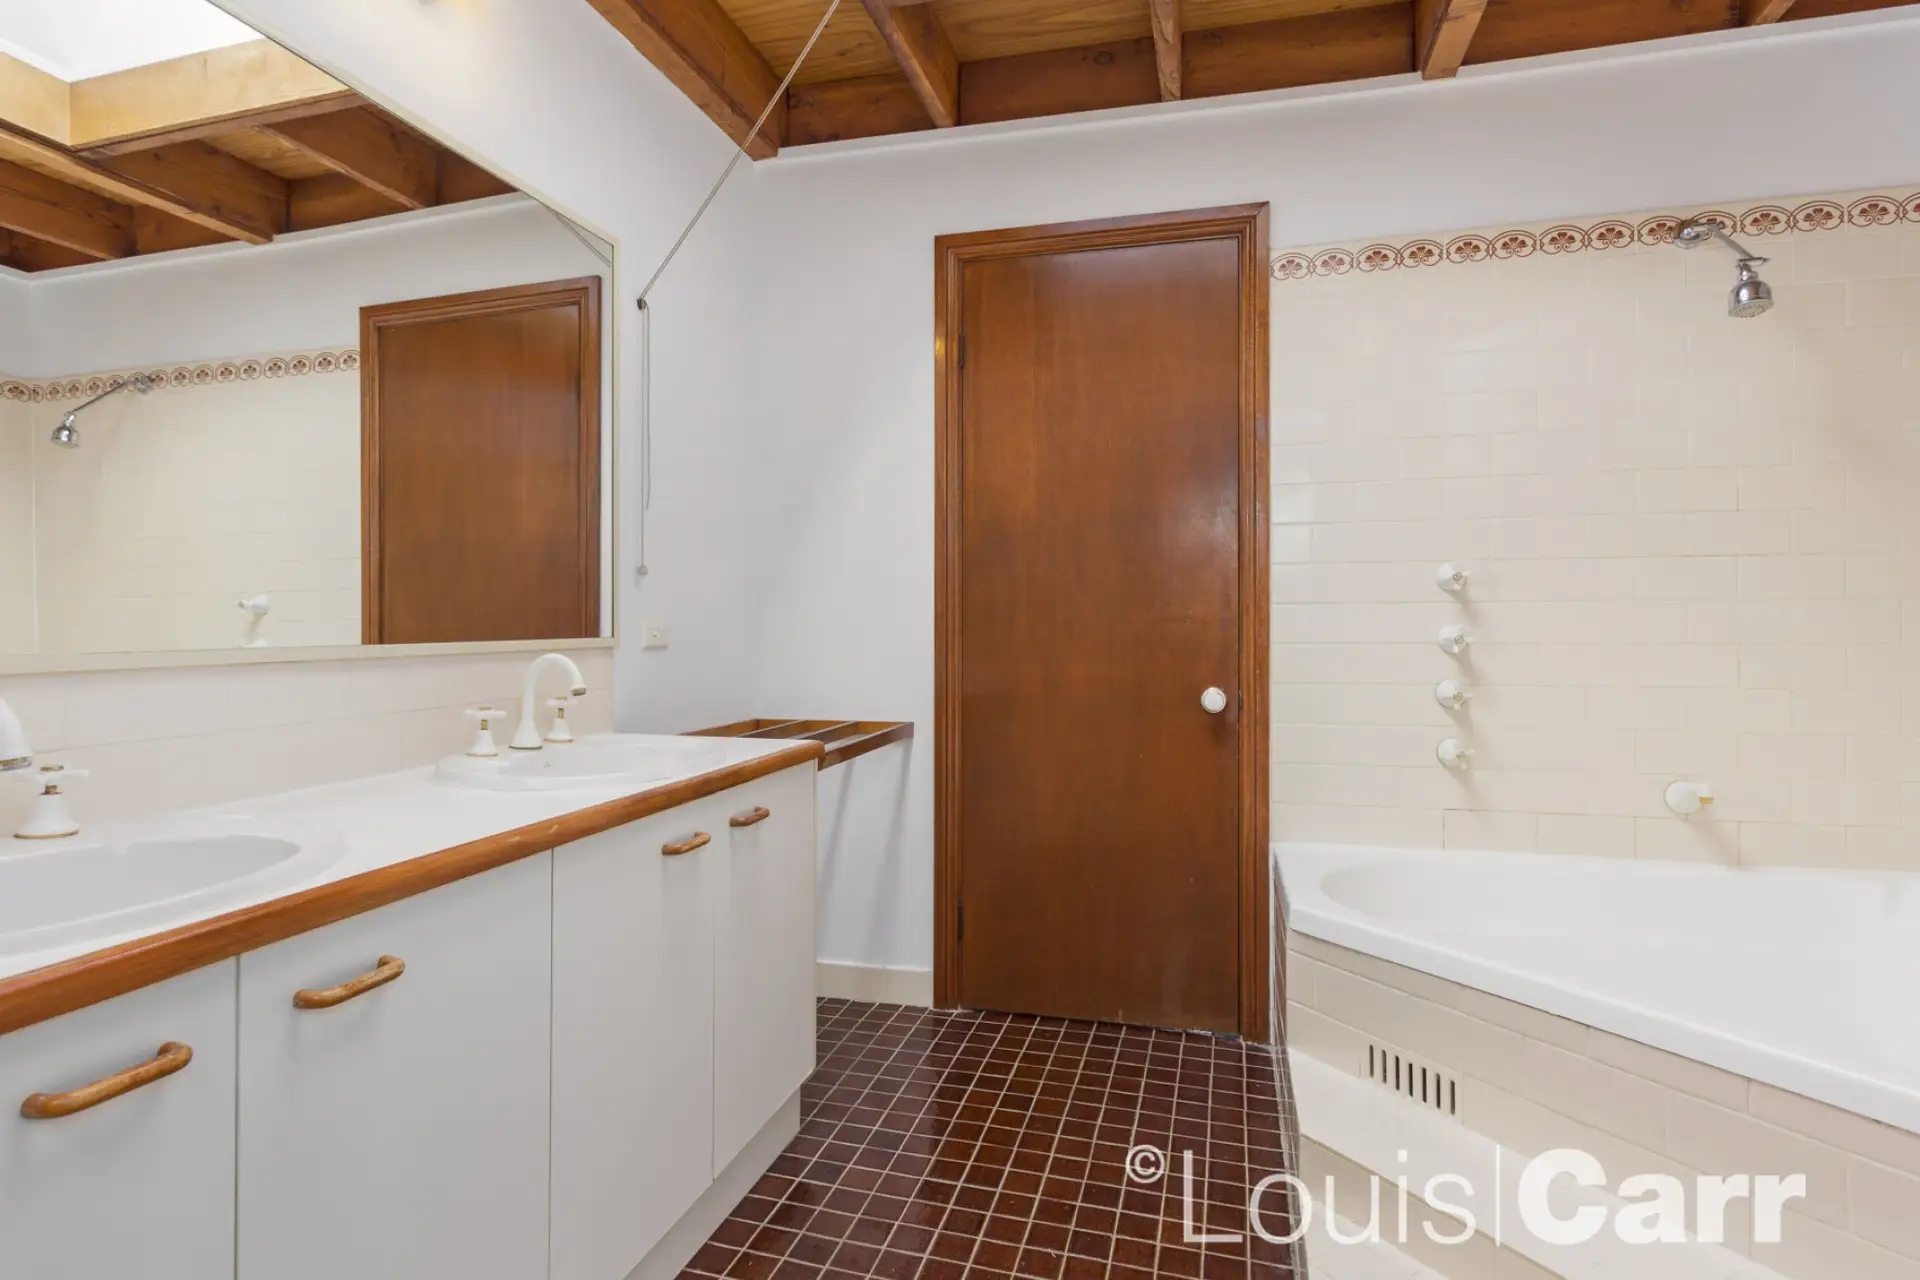 10 Gawain Court, Glenhaven Leased by Louis Carr Real Estate - image 8